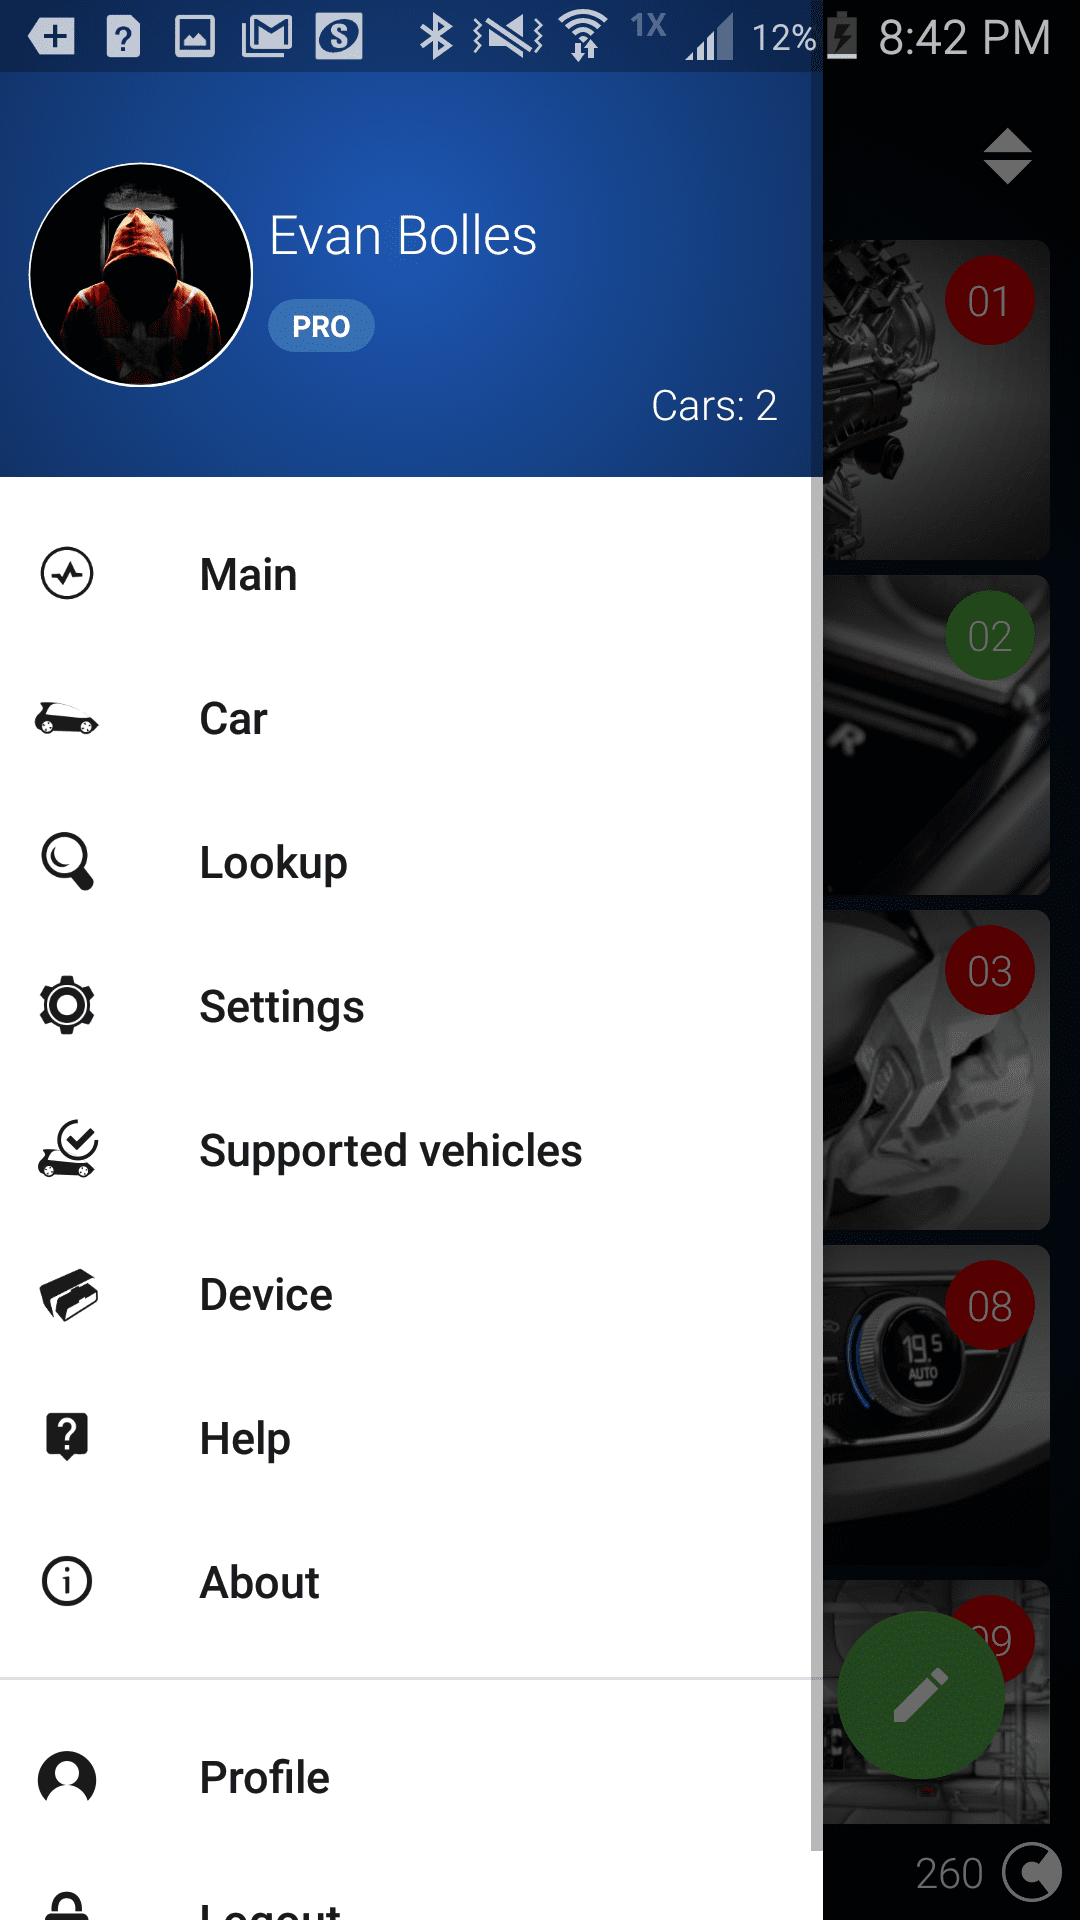 Picture of the OBDEleven app home to show which type of account